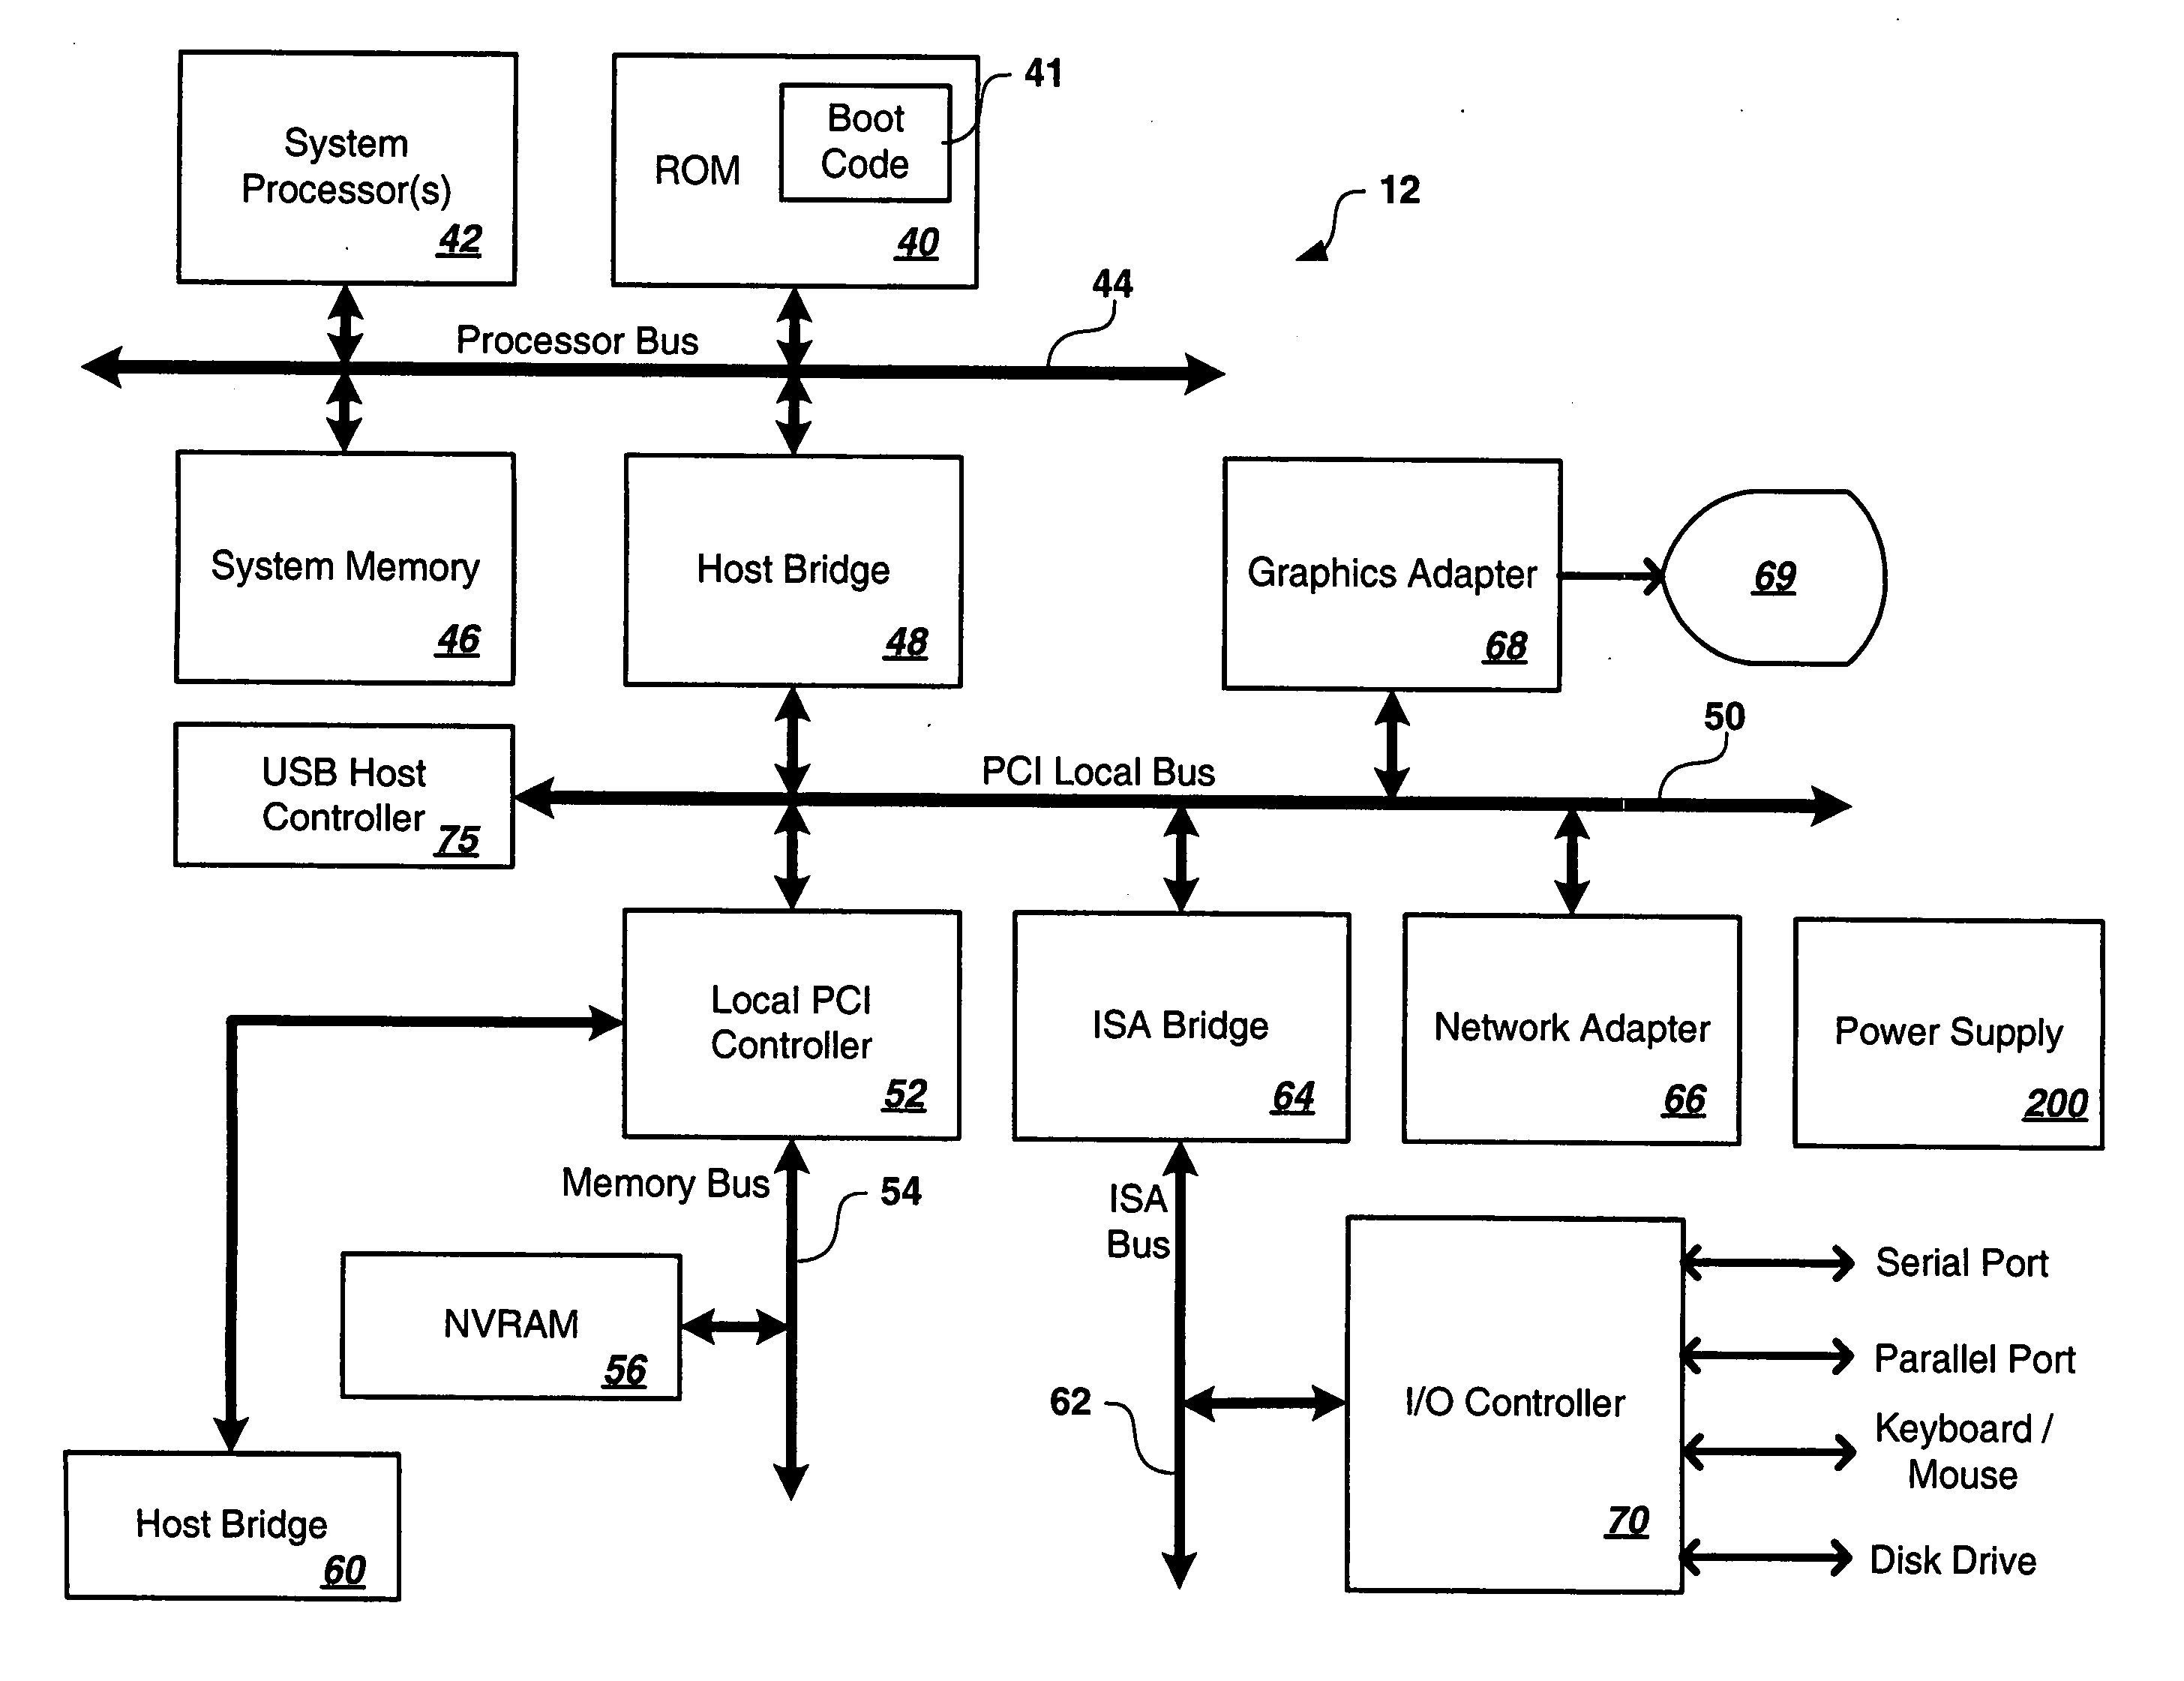 Apparatus employing predictive failure analysis based on in-circuit FET on-resistance characteristics